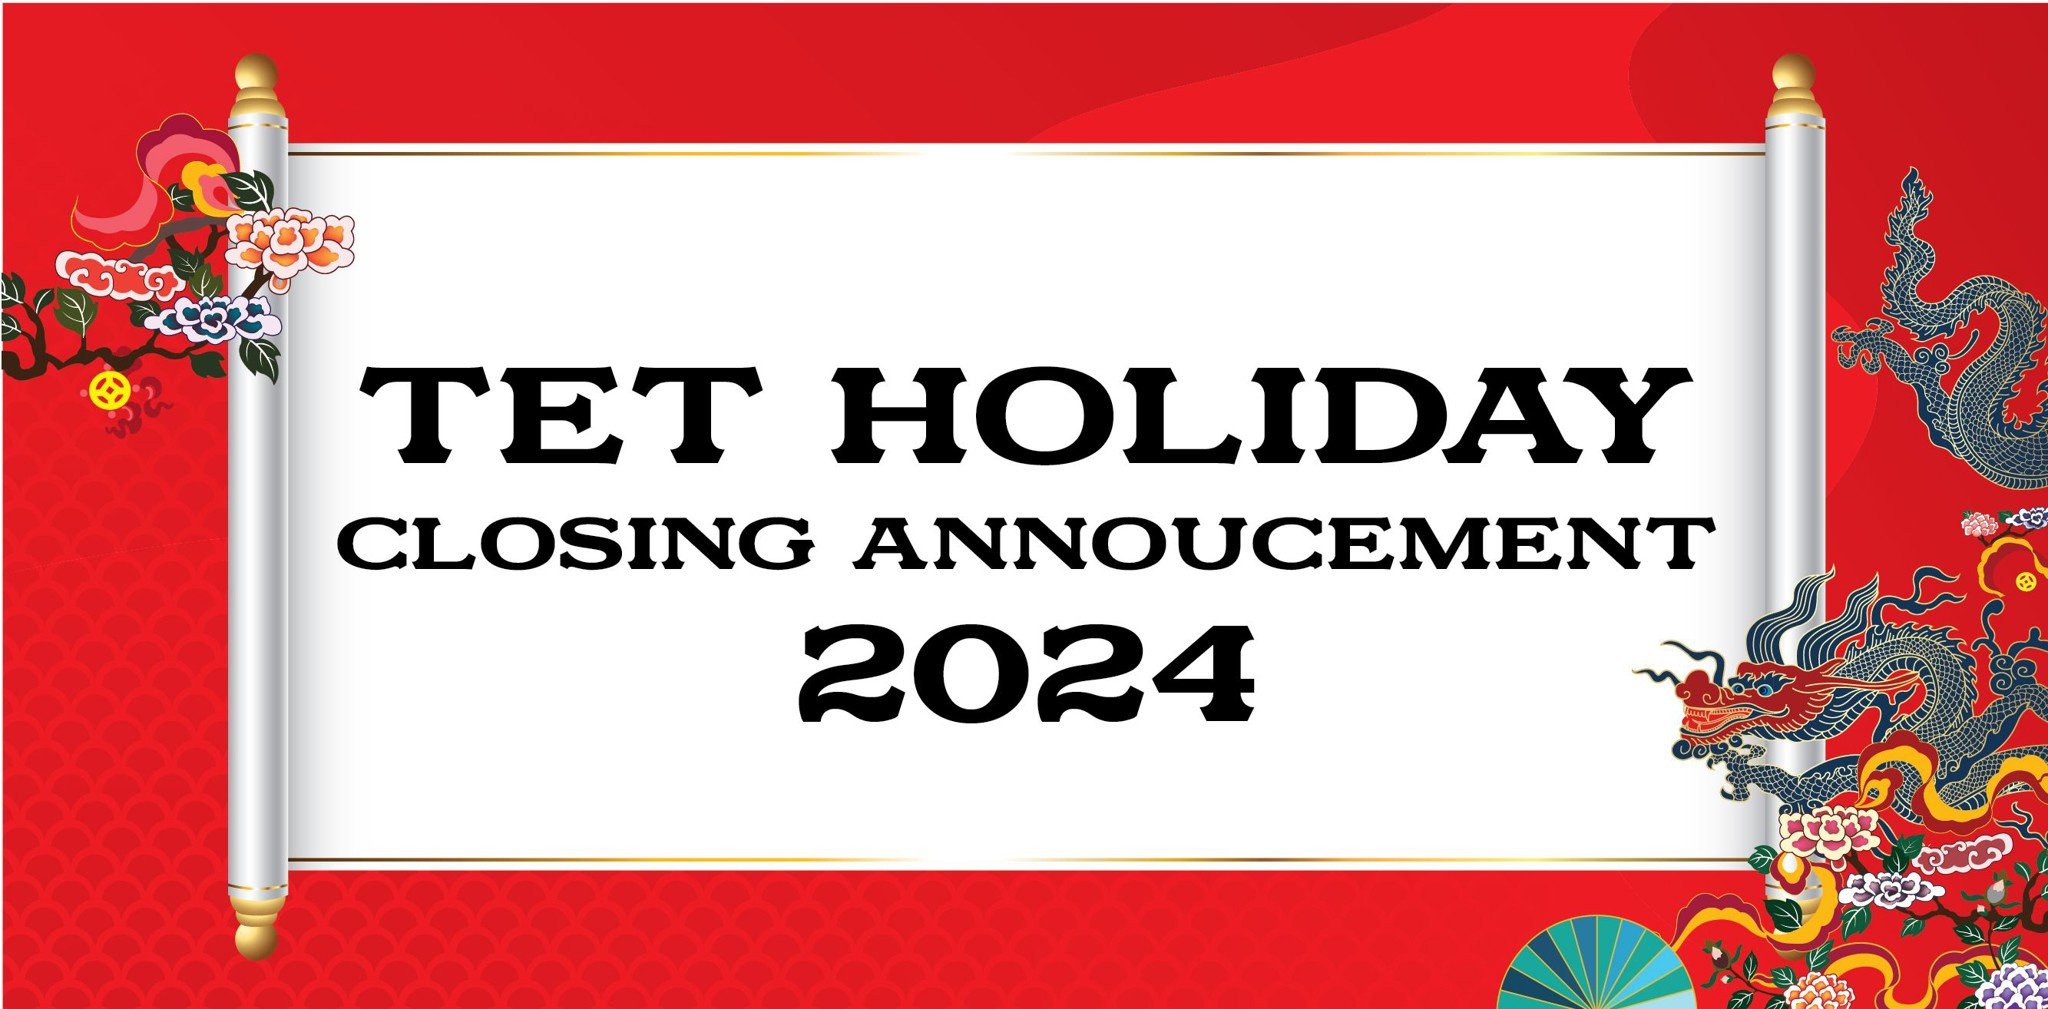 TET HOLIDAY CLOSING ANNOUNCEMENT 2024